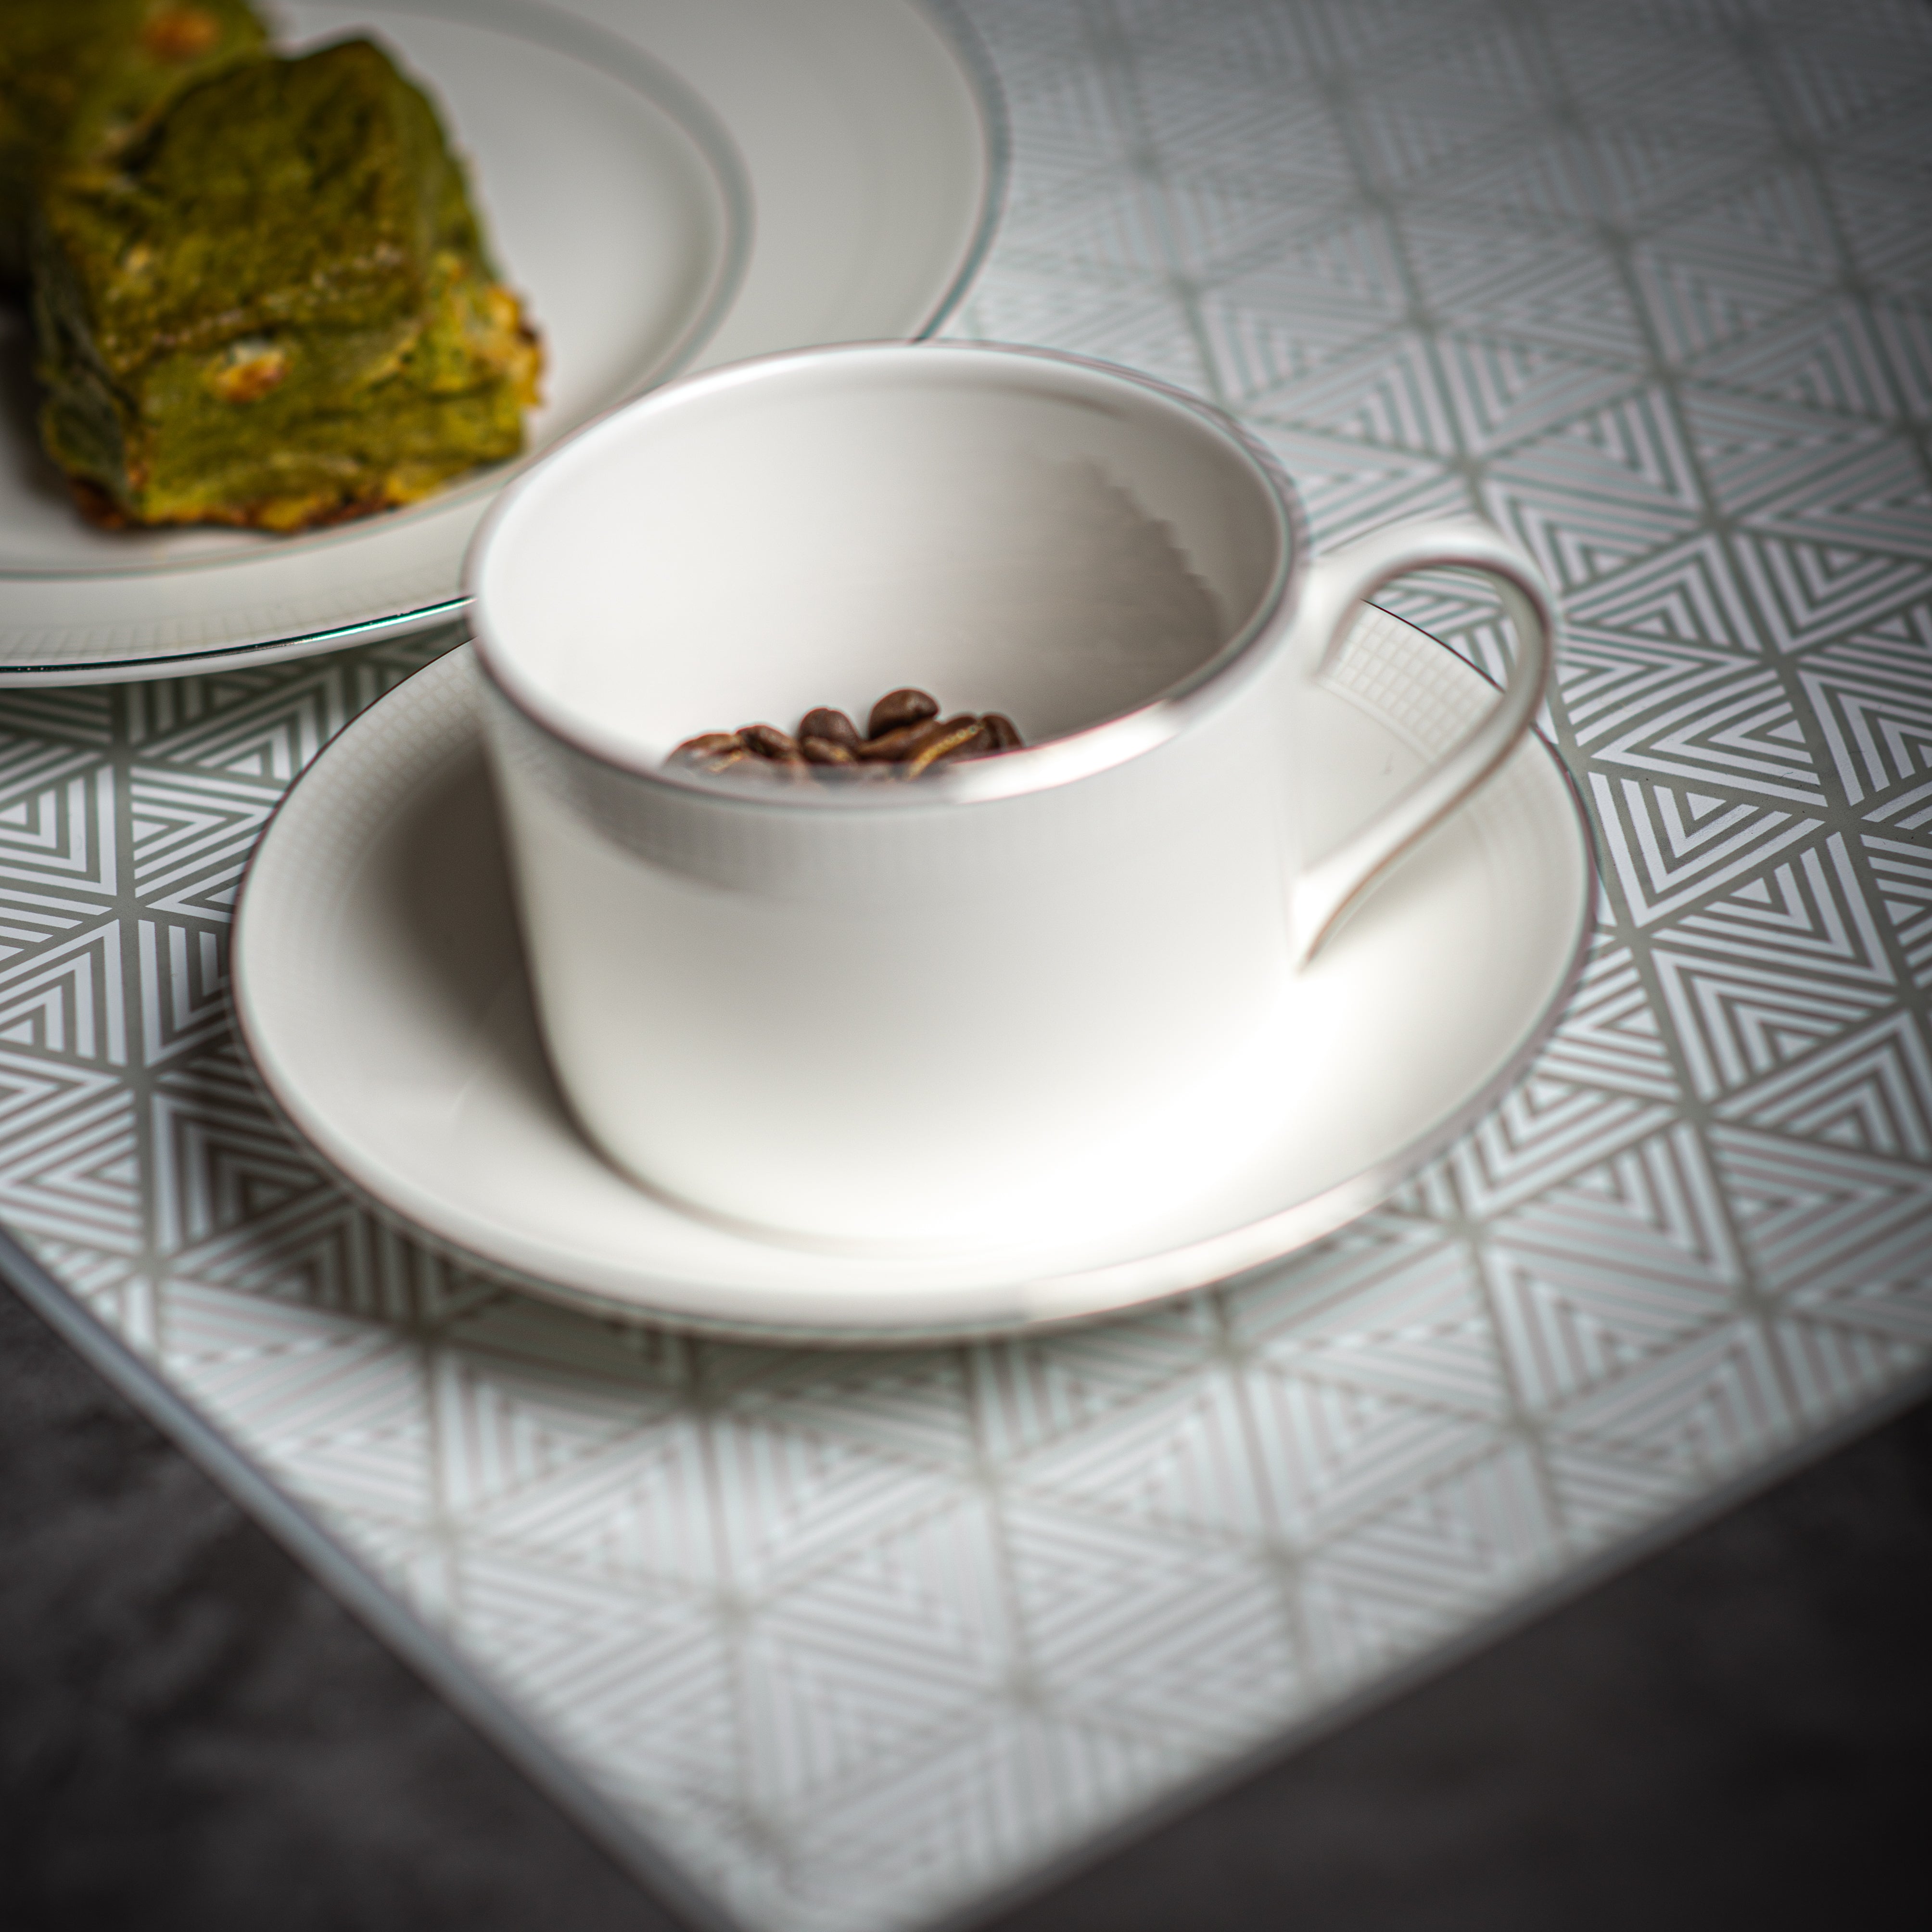 Coffee cup and plate on top of placemat with white and grey triangle pattern